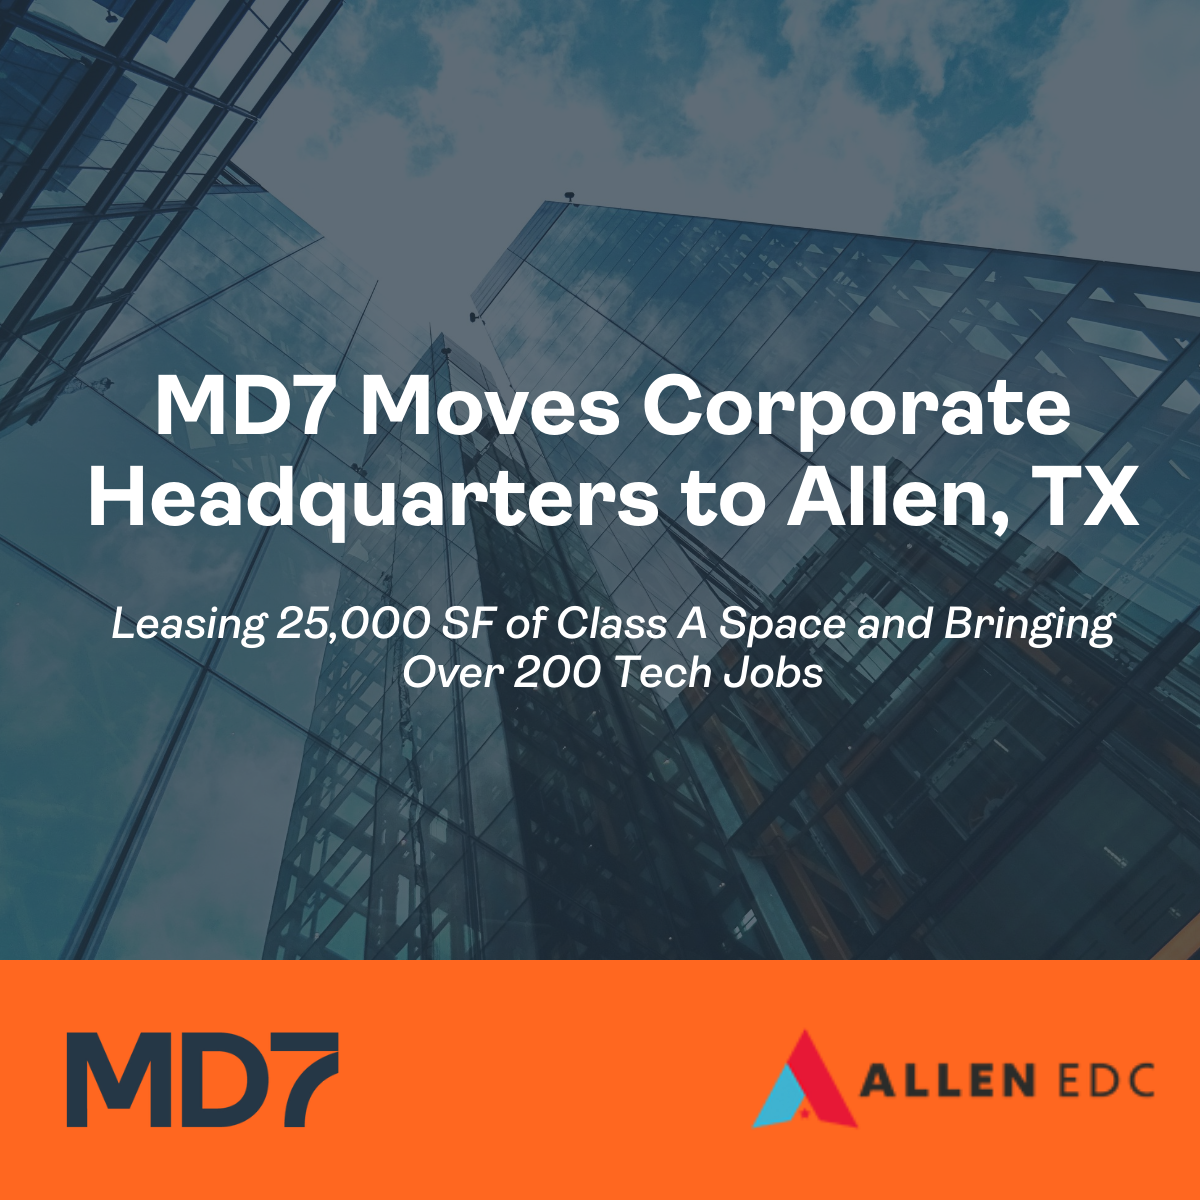 The Texas Enterprise Fund (TEF) awarded MD7 a grant to help fund the project. This is the first time that a company relocating to Allen has received these funds. (Courtesy of AEDC.)